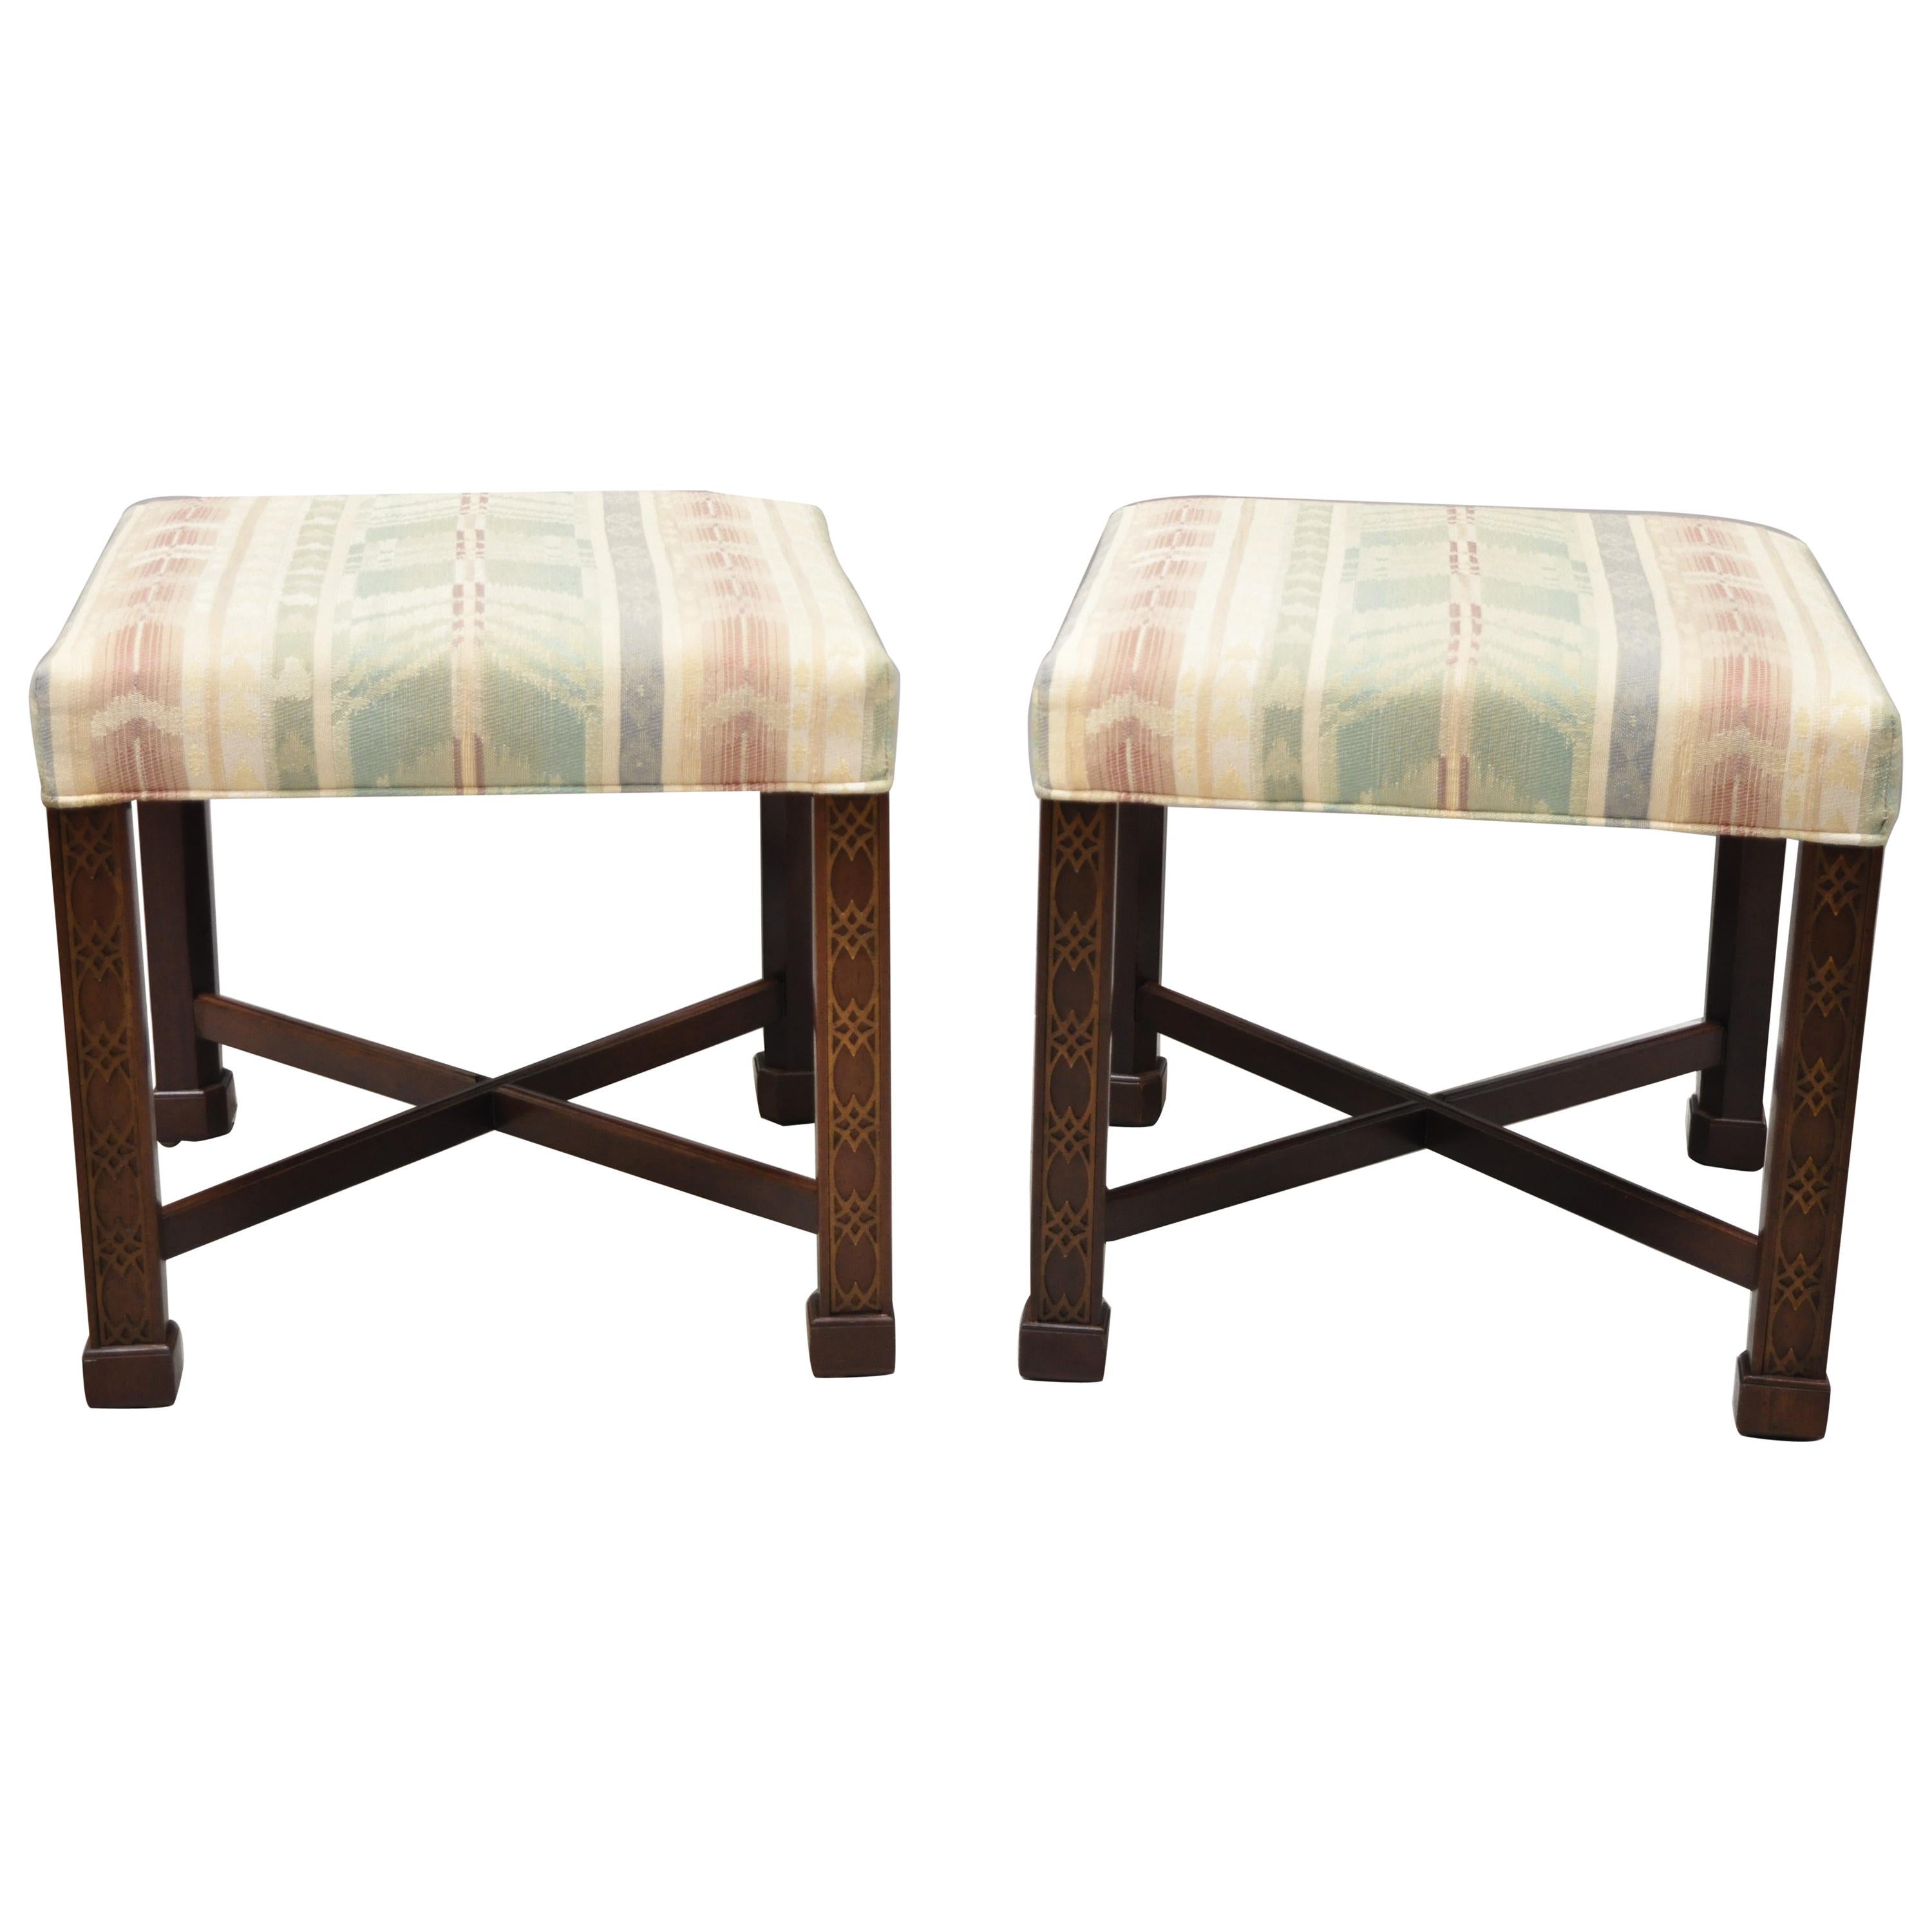 Ethan Allen Chinese Chippendale Style Mahogany Fretwork Square Stools, a Pair